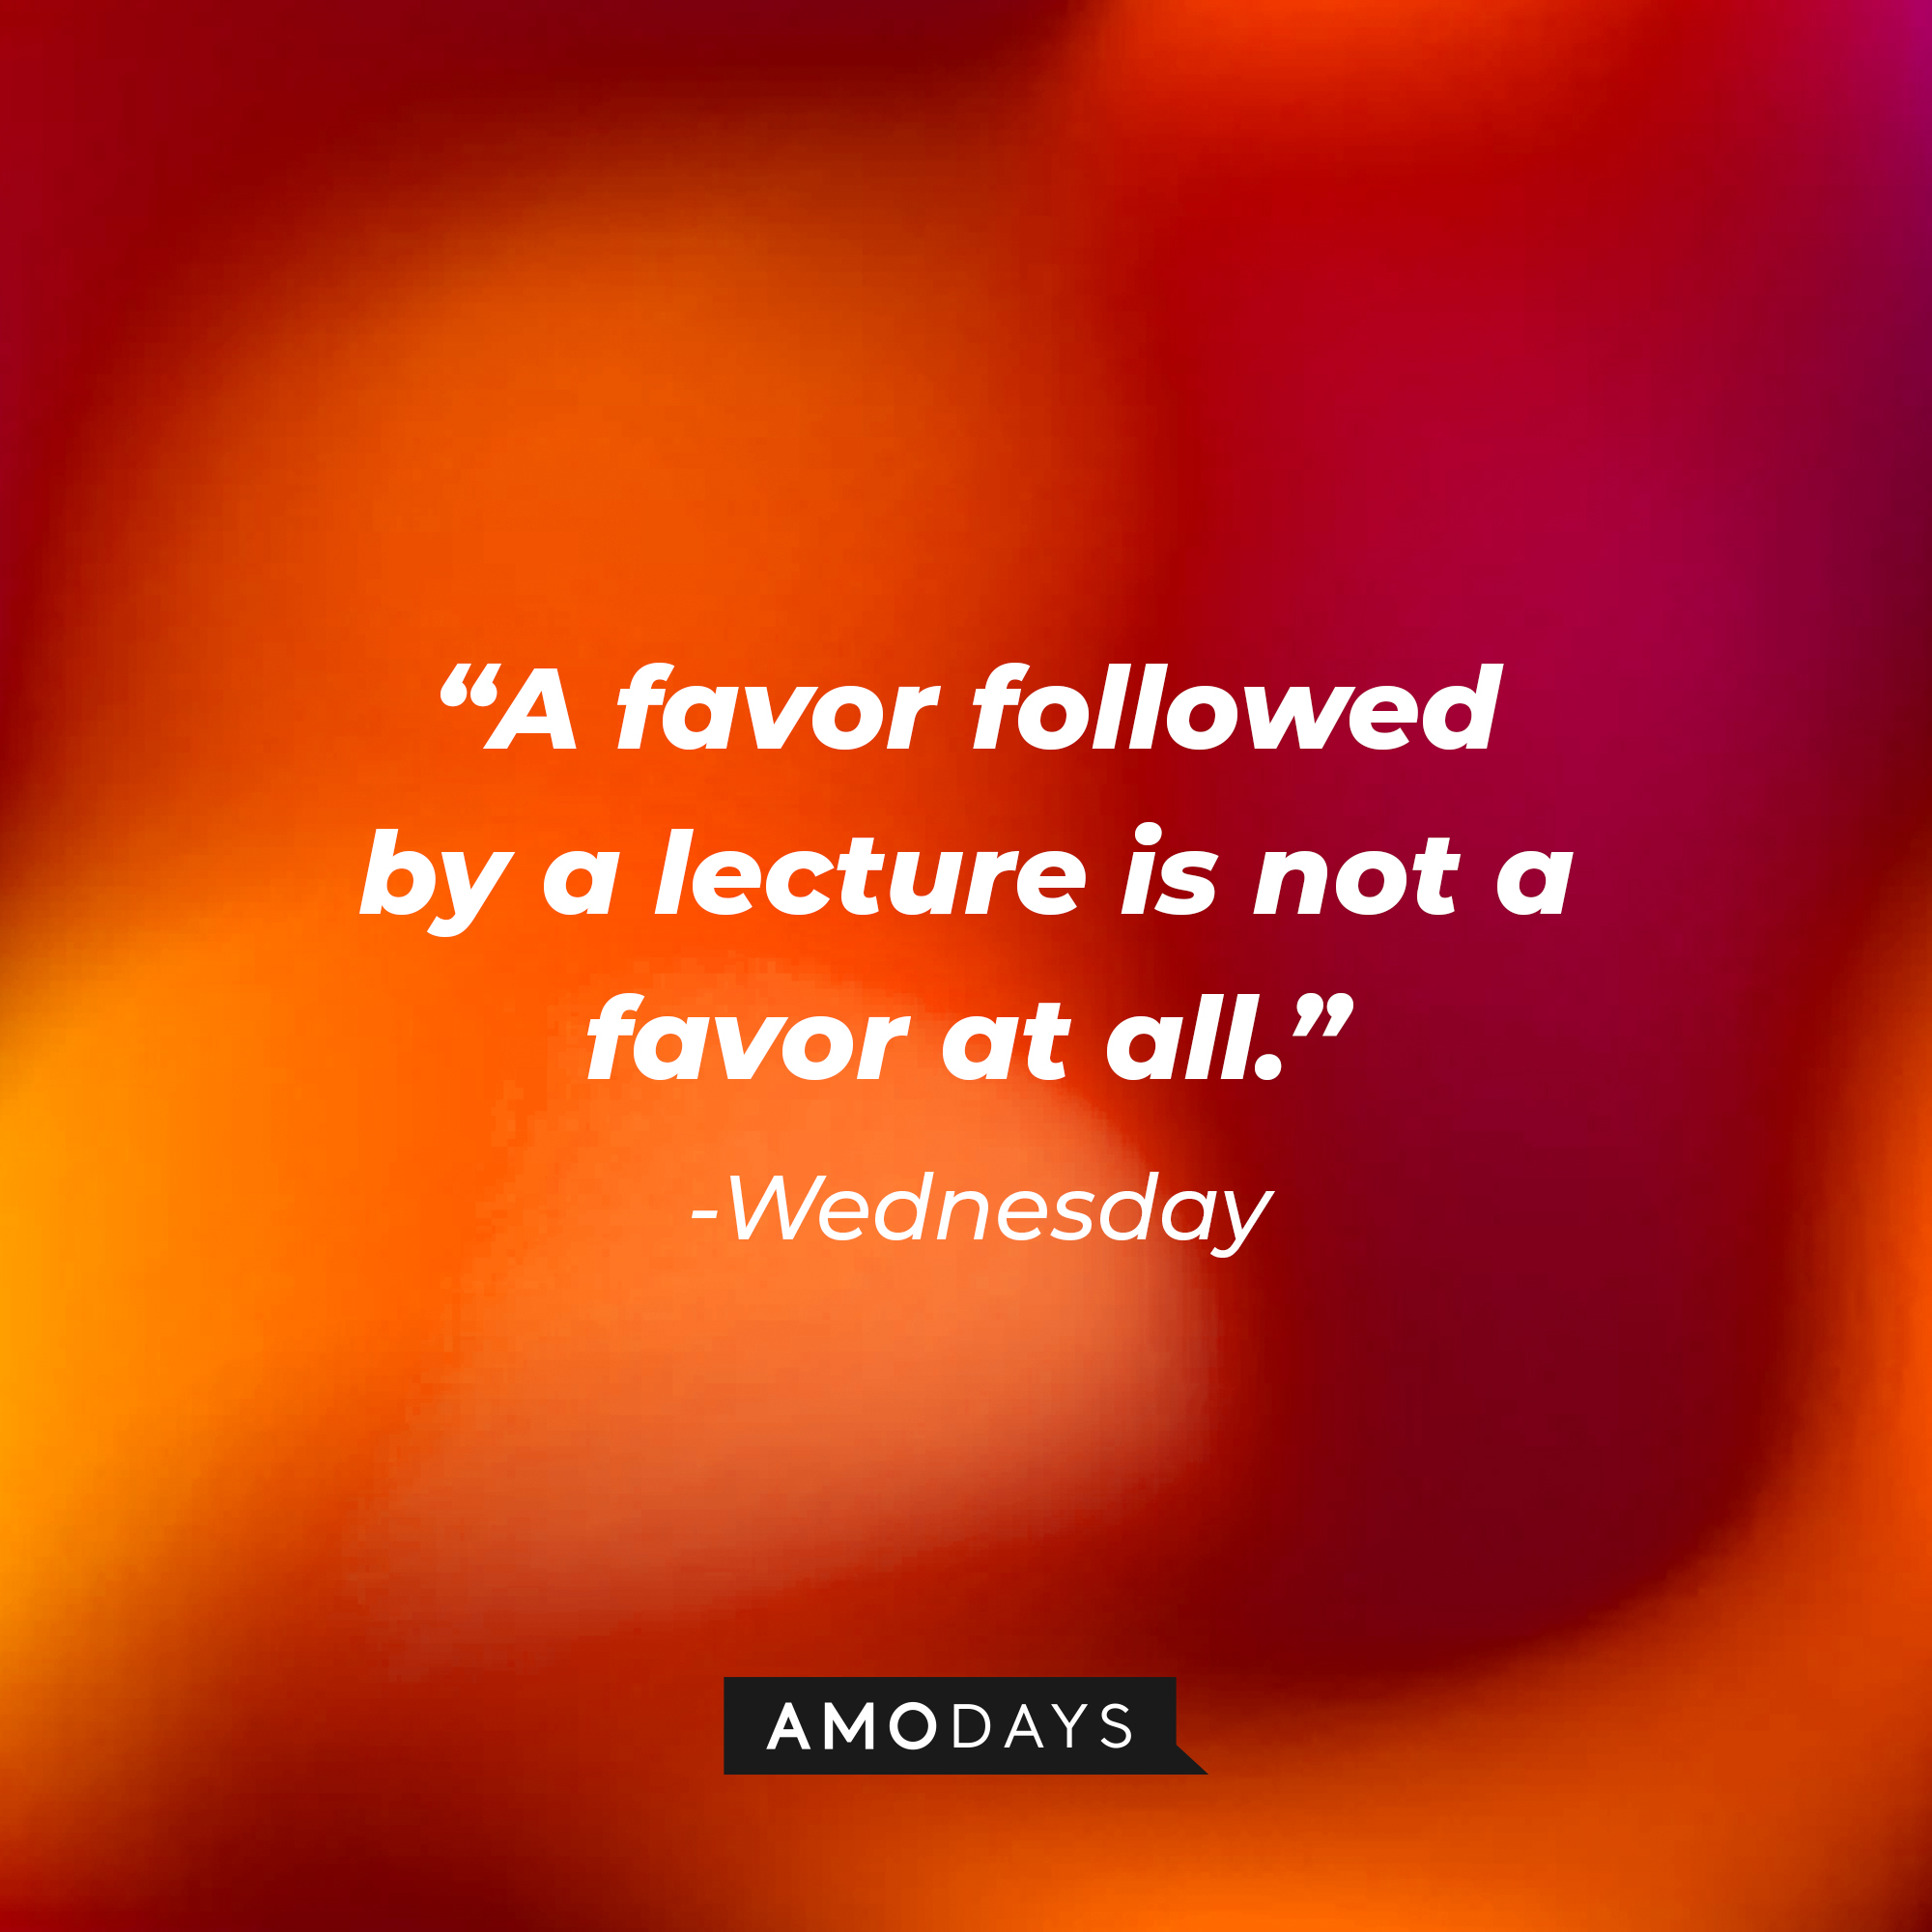 Wednesday's quote: "A favor followed by a lecture is not a favor at all." | Source: Amodays